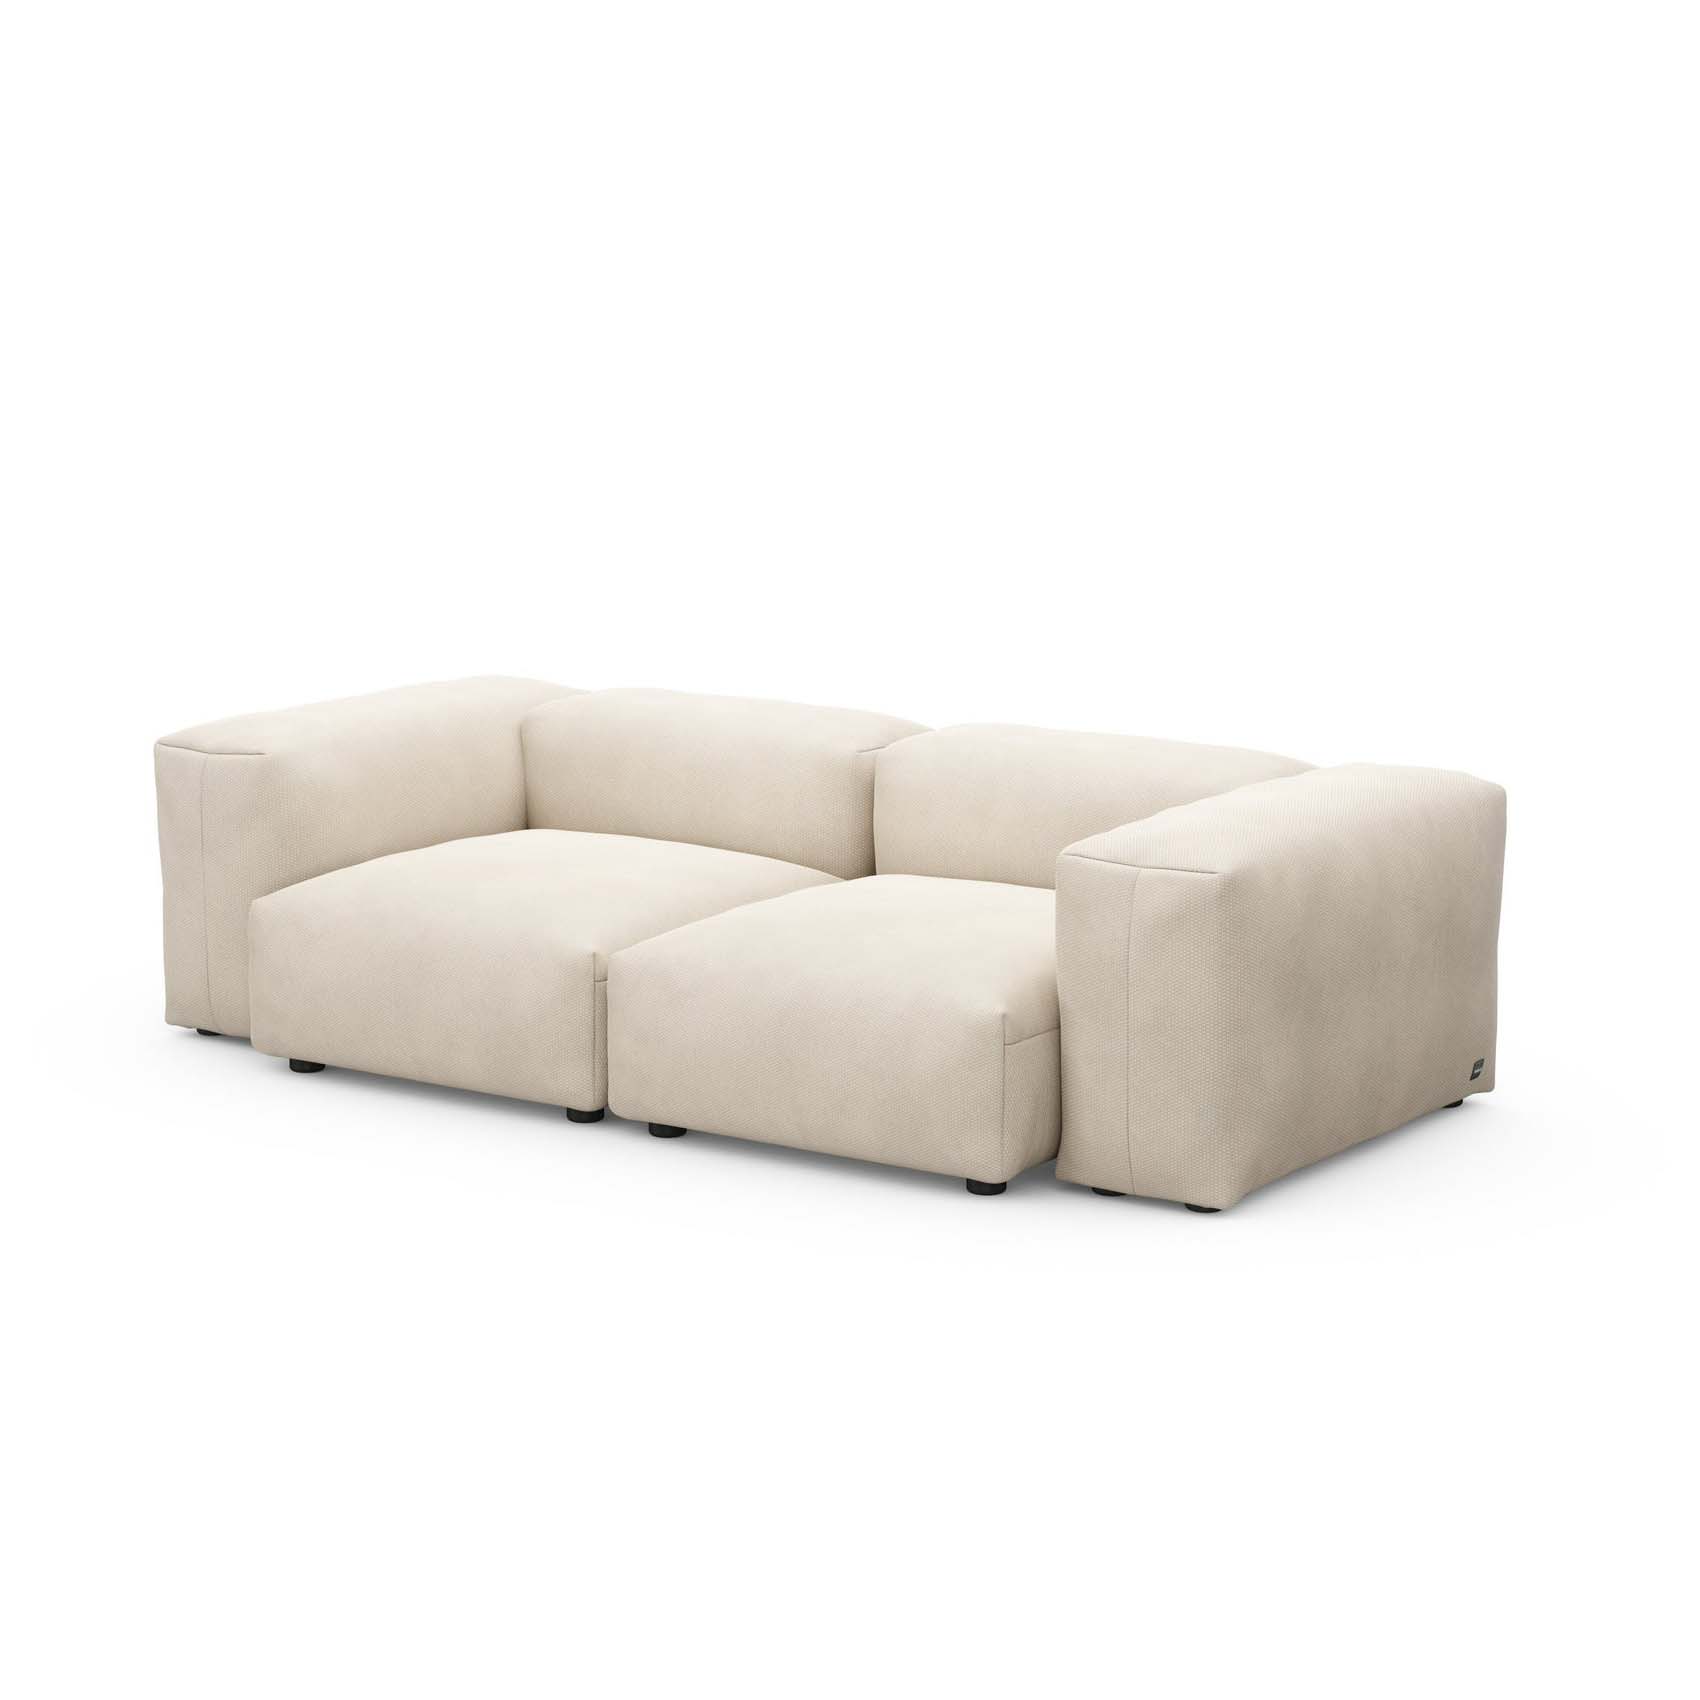 Two Seat Sofa S Knit Beige